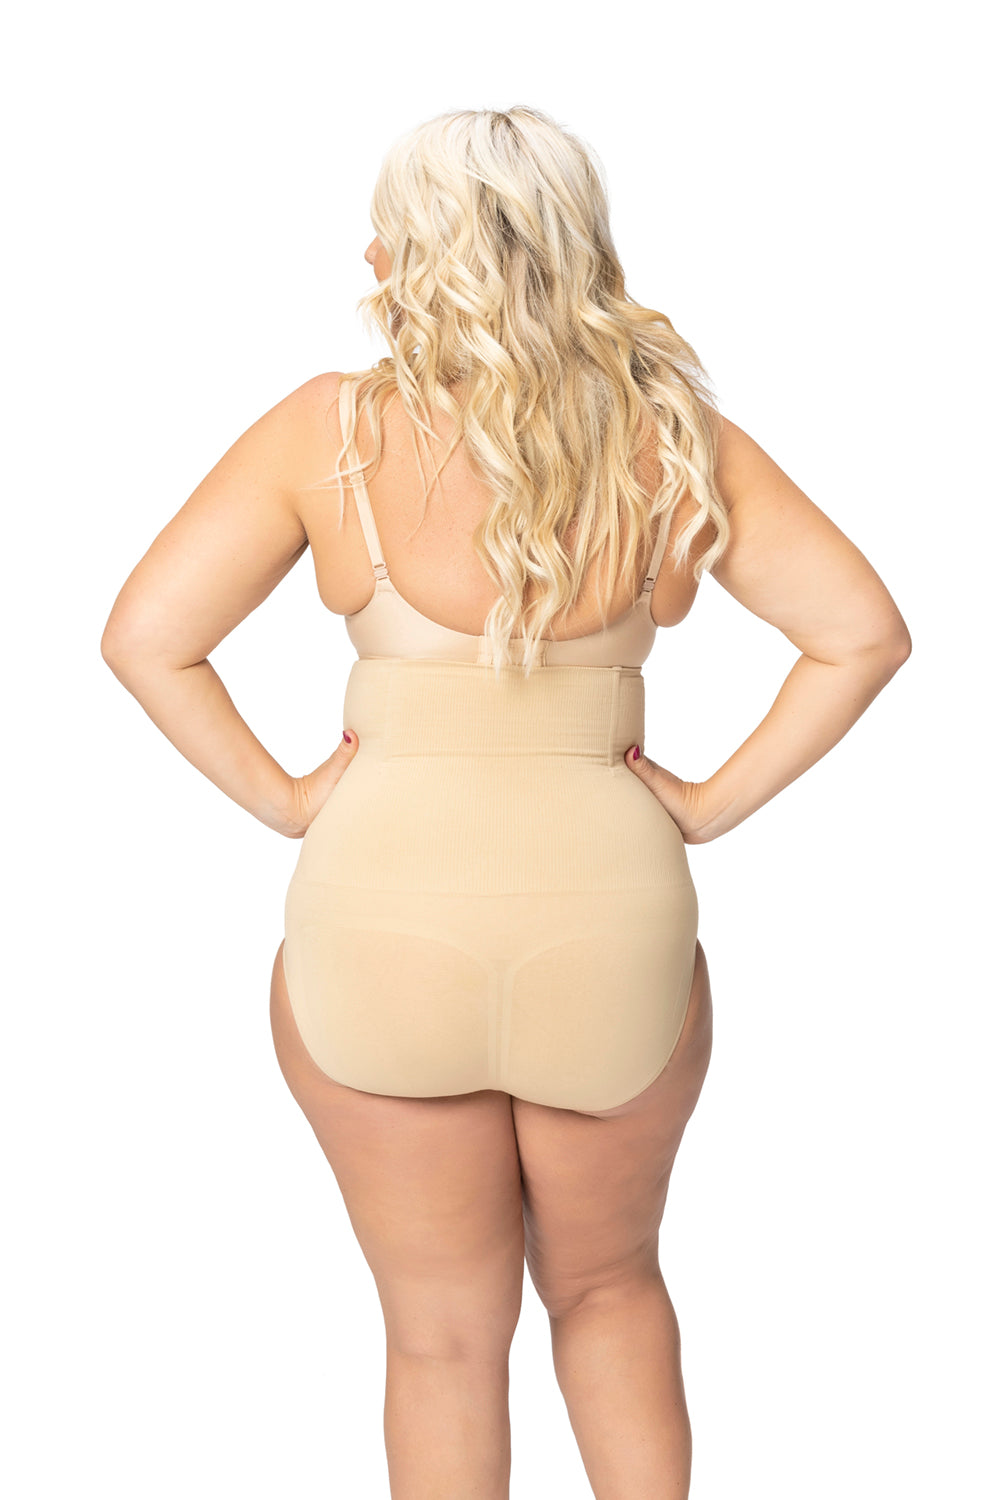 Top 5 Shapewear You Need to Try This Summer – Robert Matthew